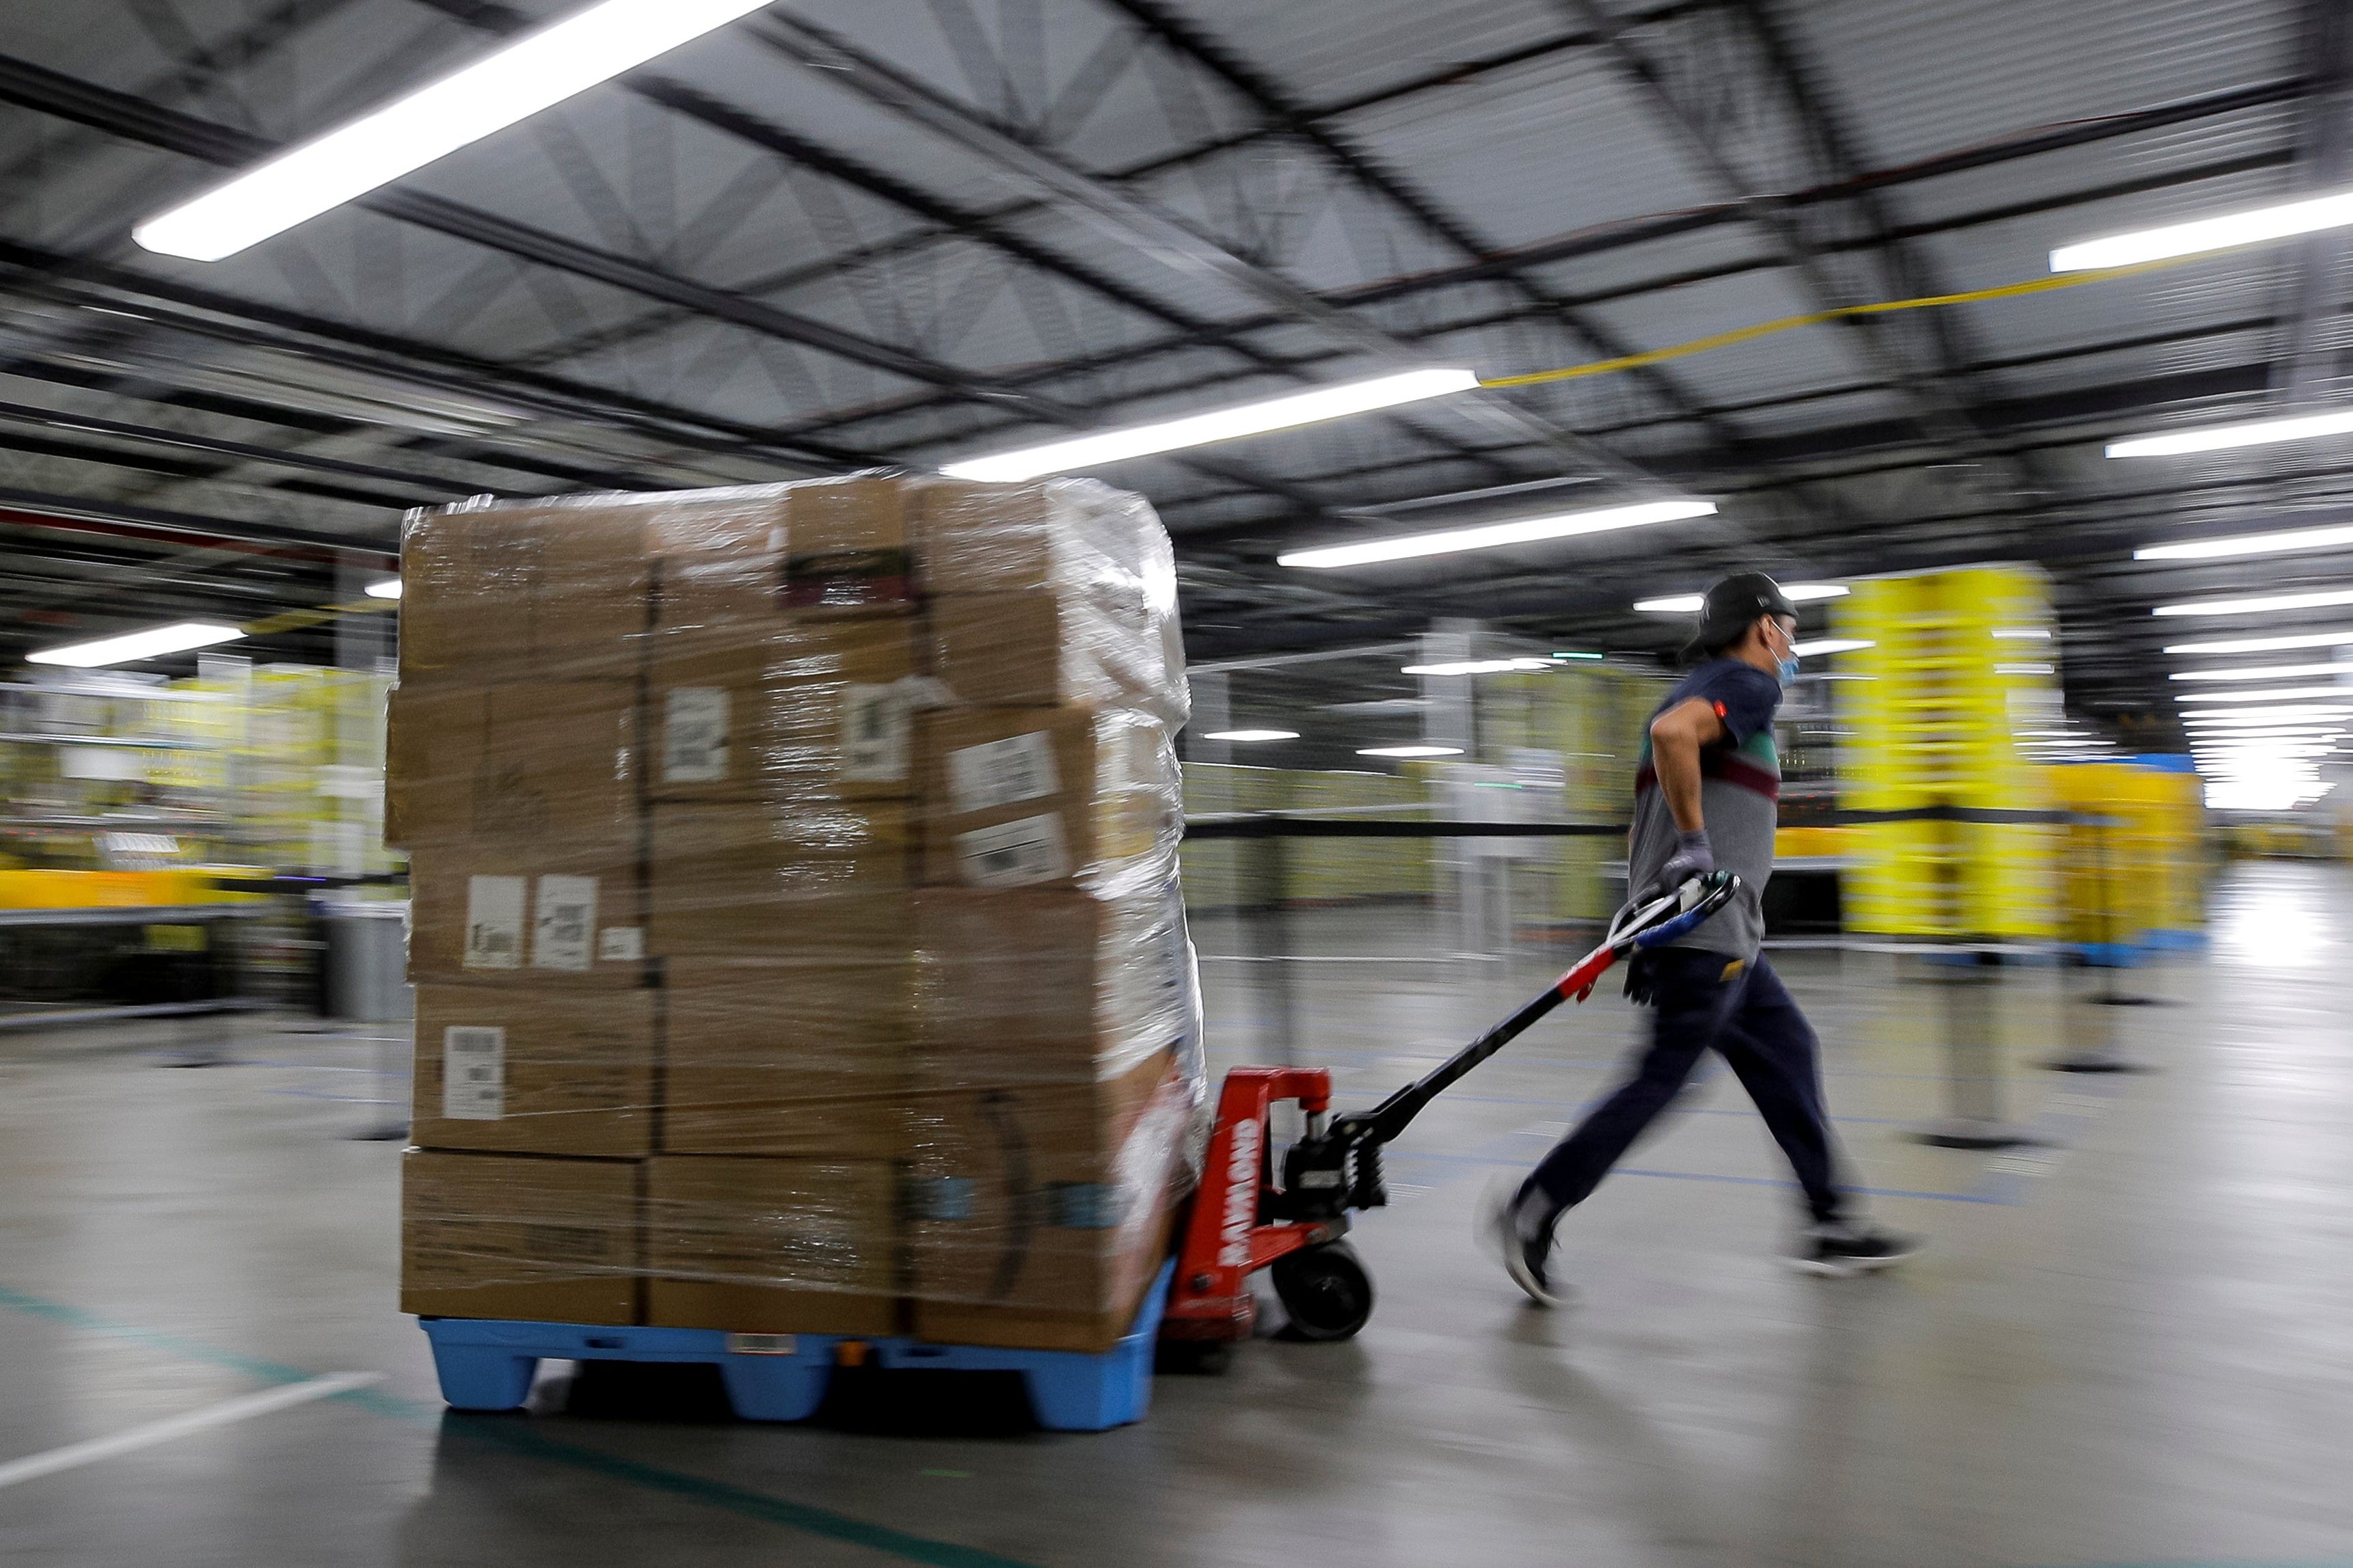 A worker pulls a cart piled high with Amazon packages through a warehouse